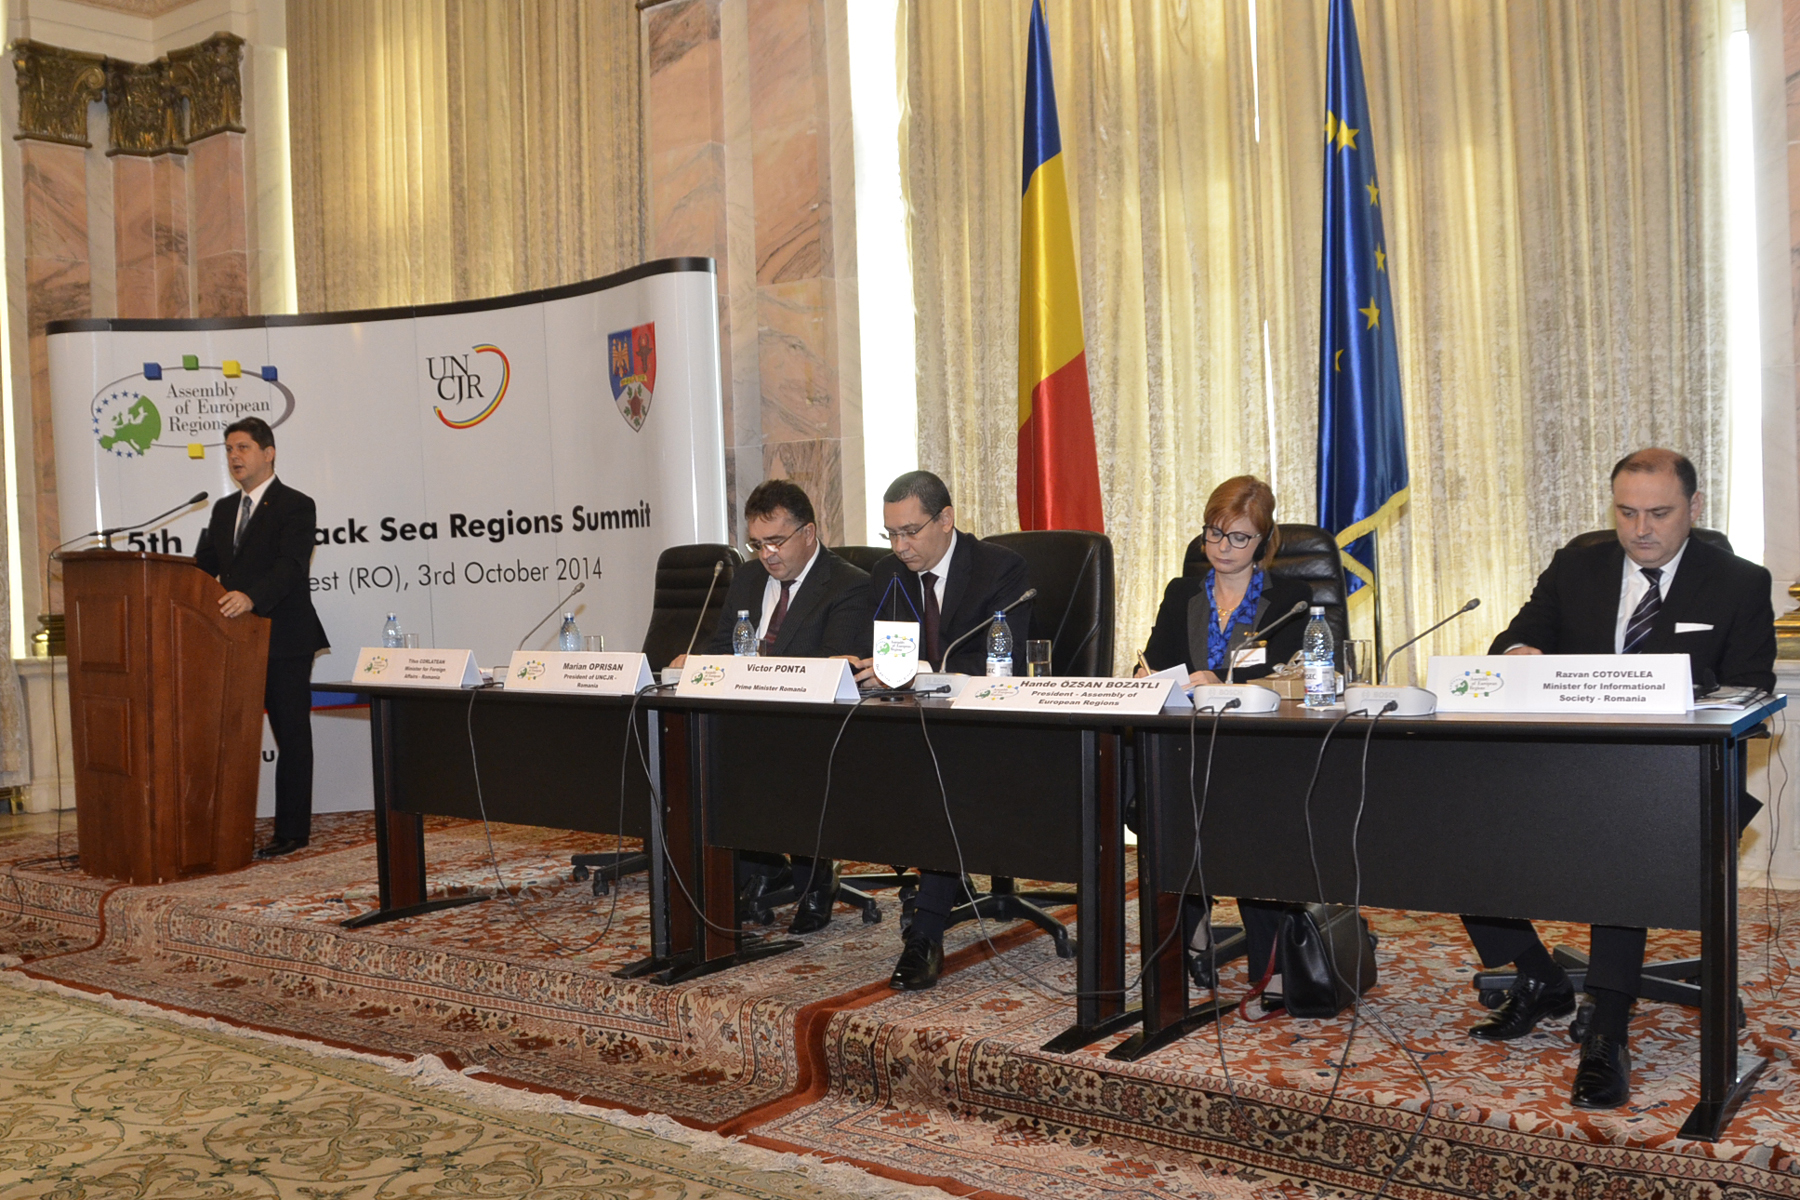 Photo credits: Romanian Ministry of Foreign Affairs